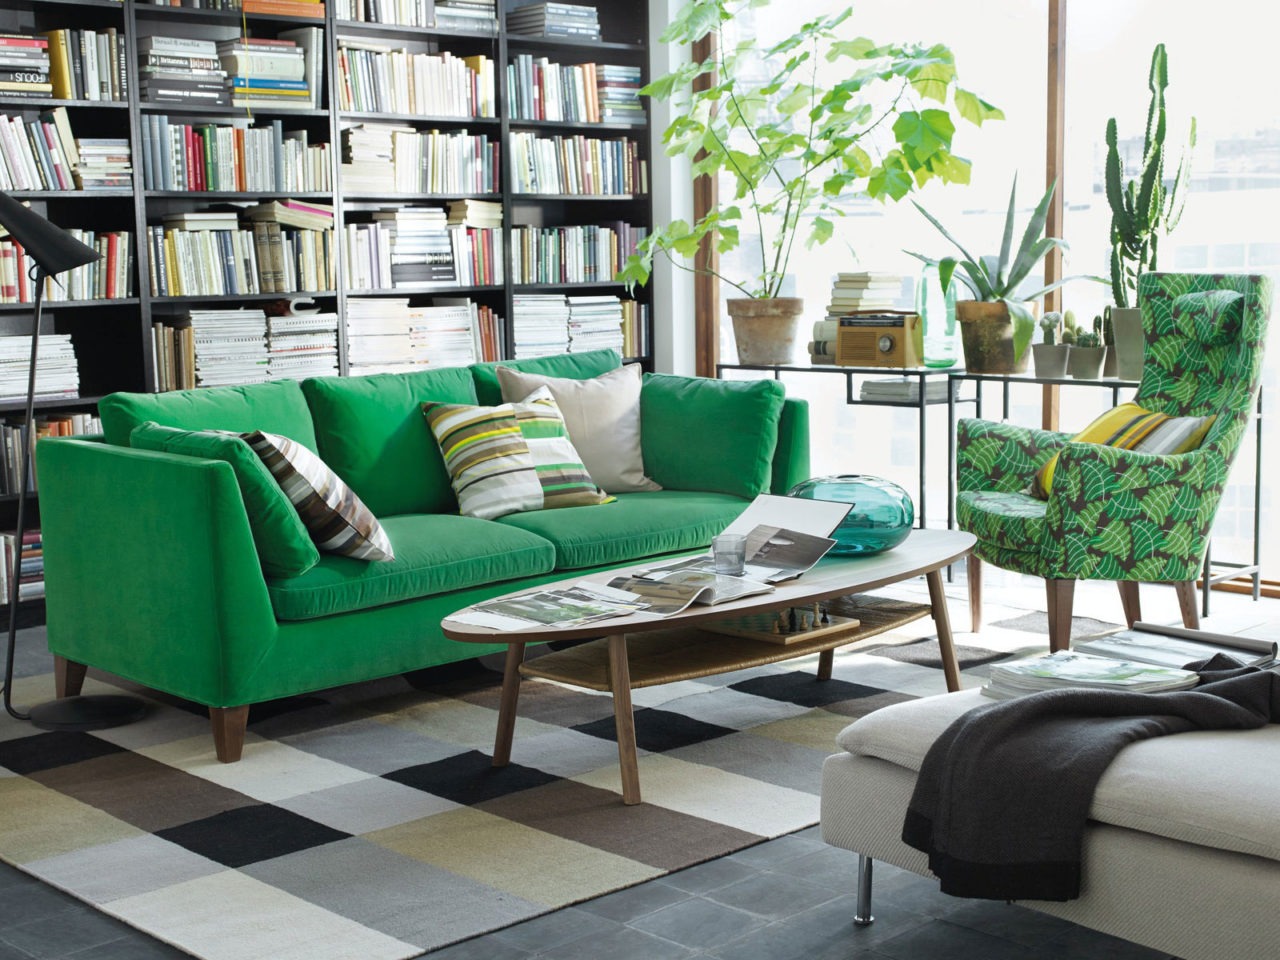 Living room with green plants in large windows, sofa and armchair in green tones, a bookshelf covers an entire wall.